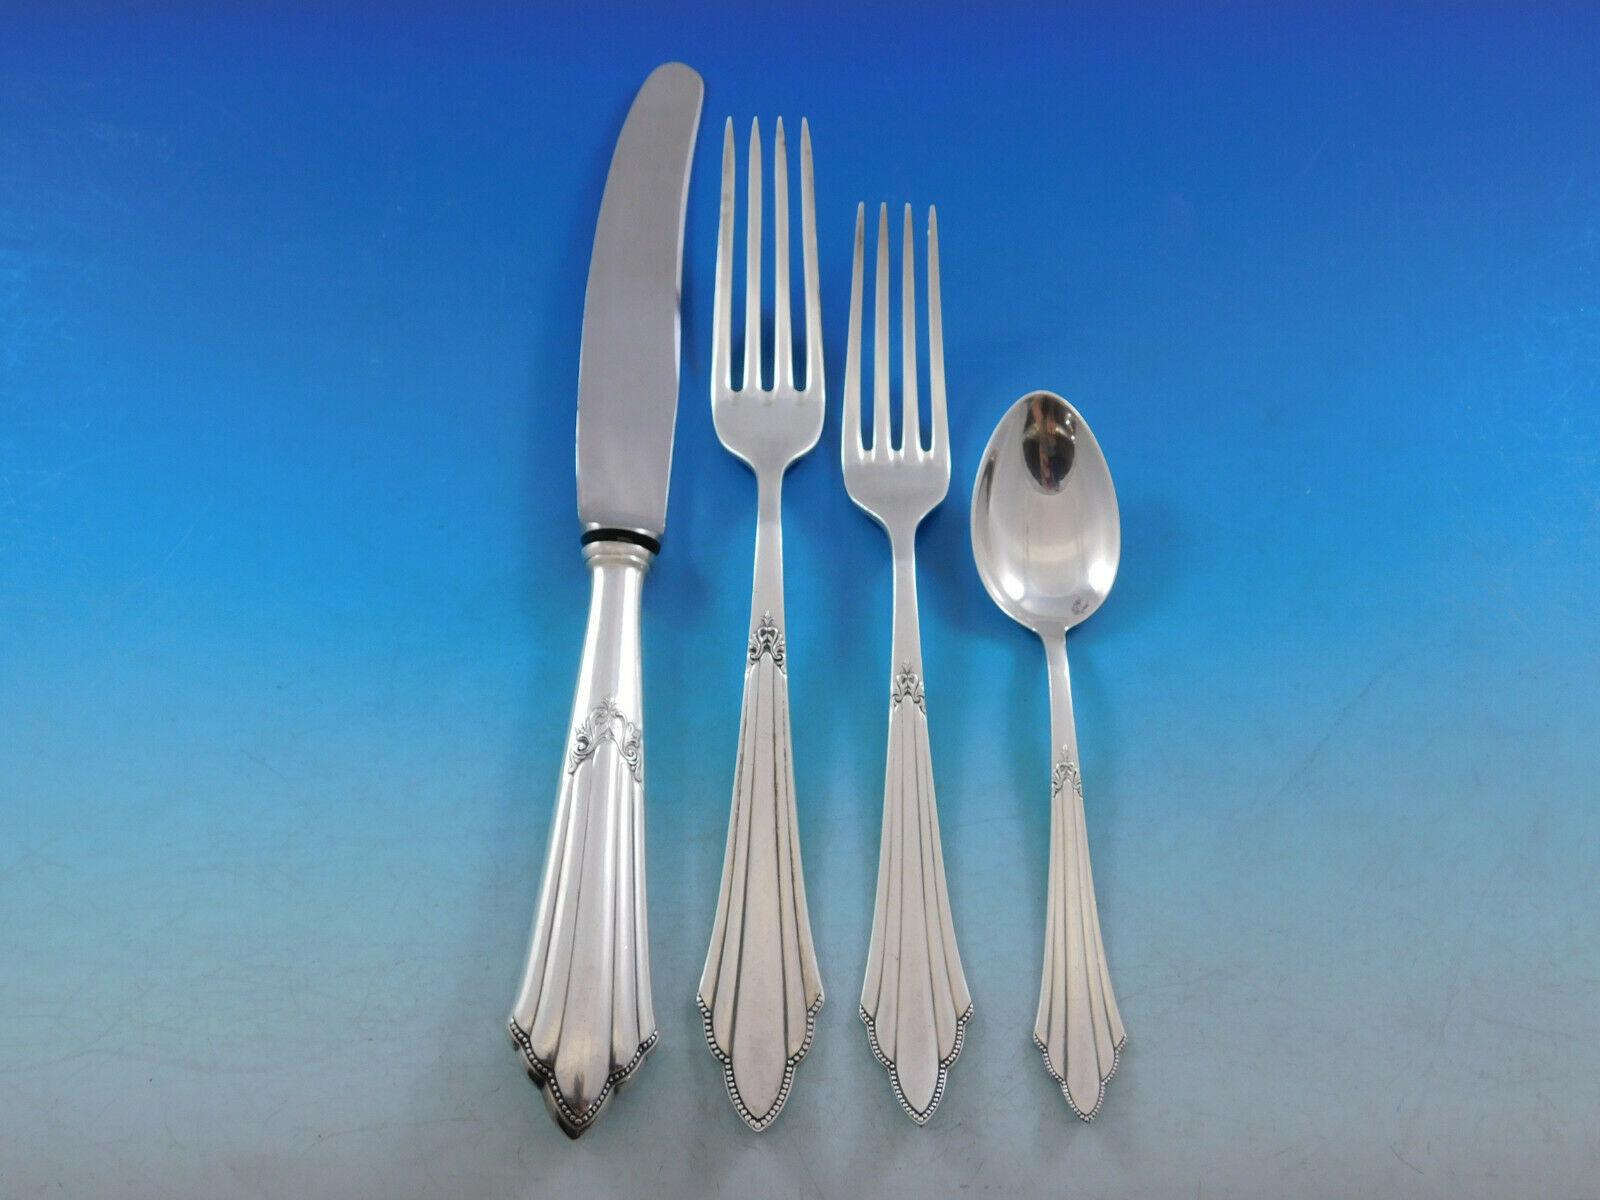 Fan by WMF Sterling Silver German flatware set - 62 pieces. This set includes:

8 dinner knives, 9 1/2